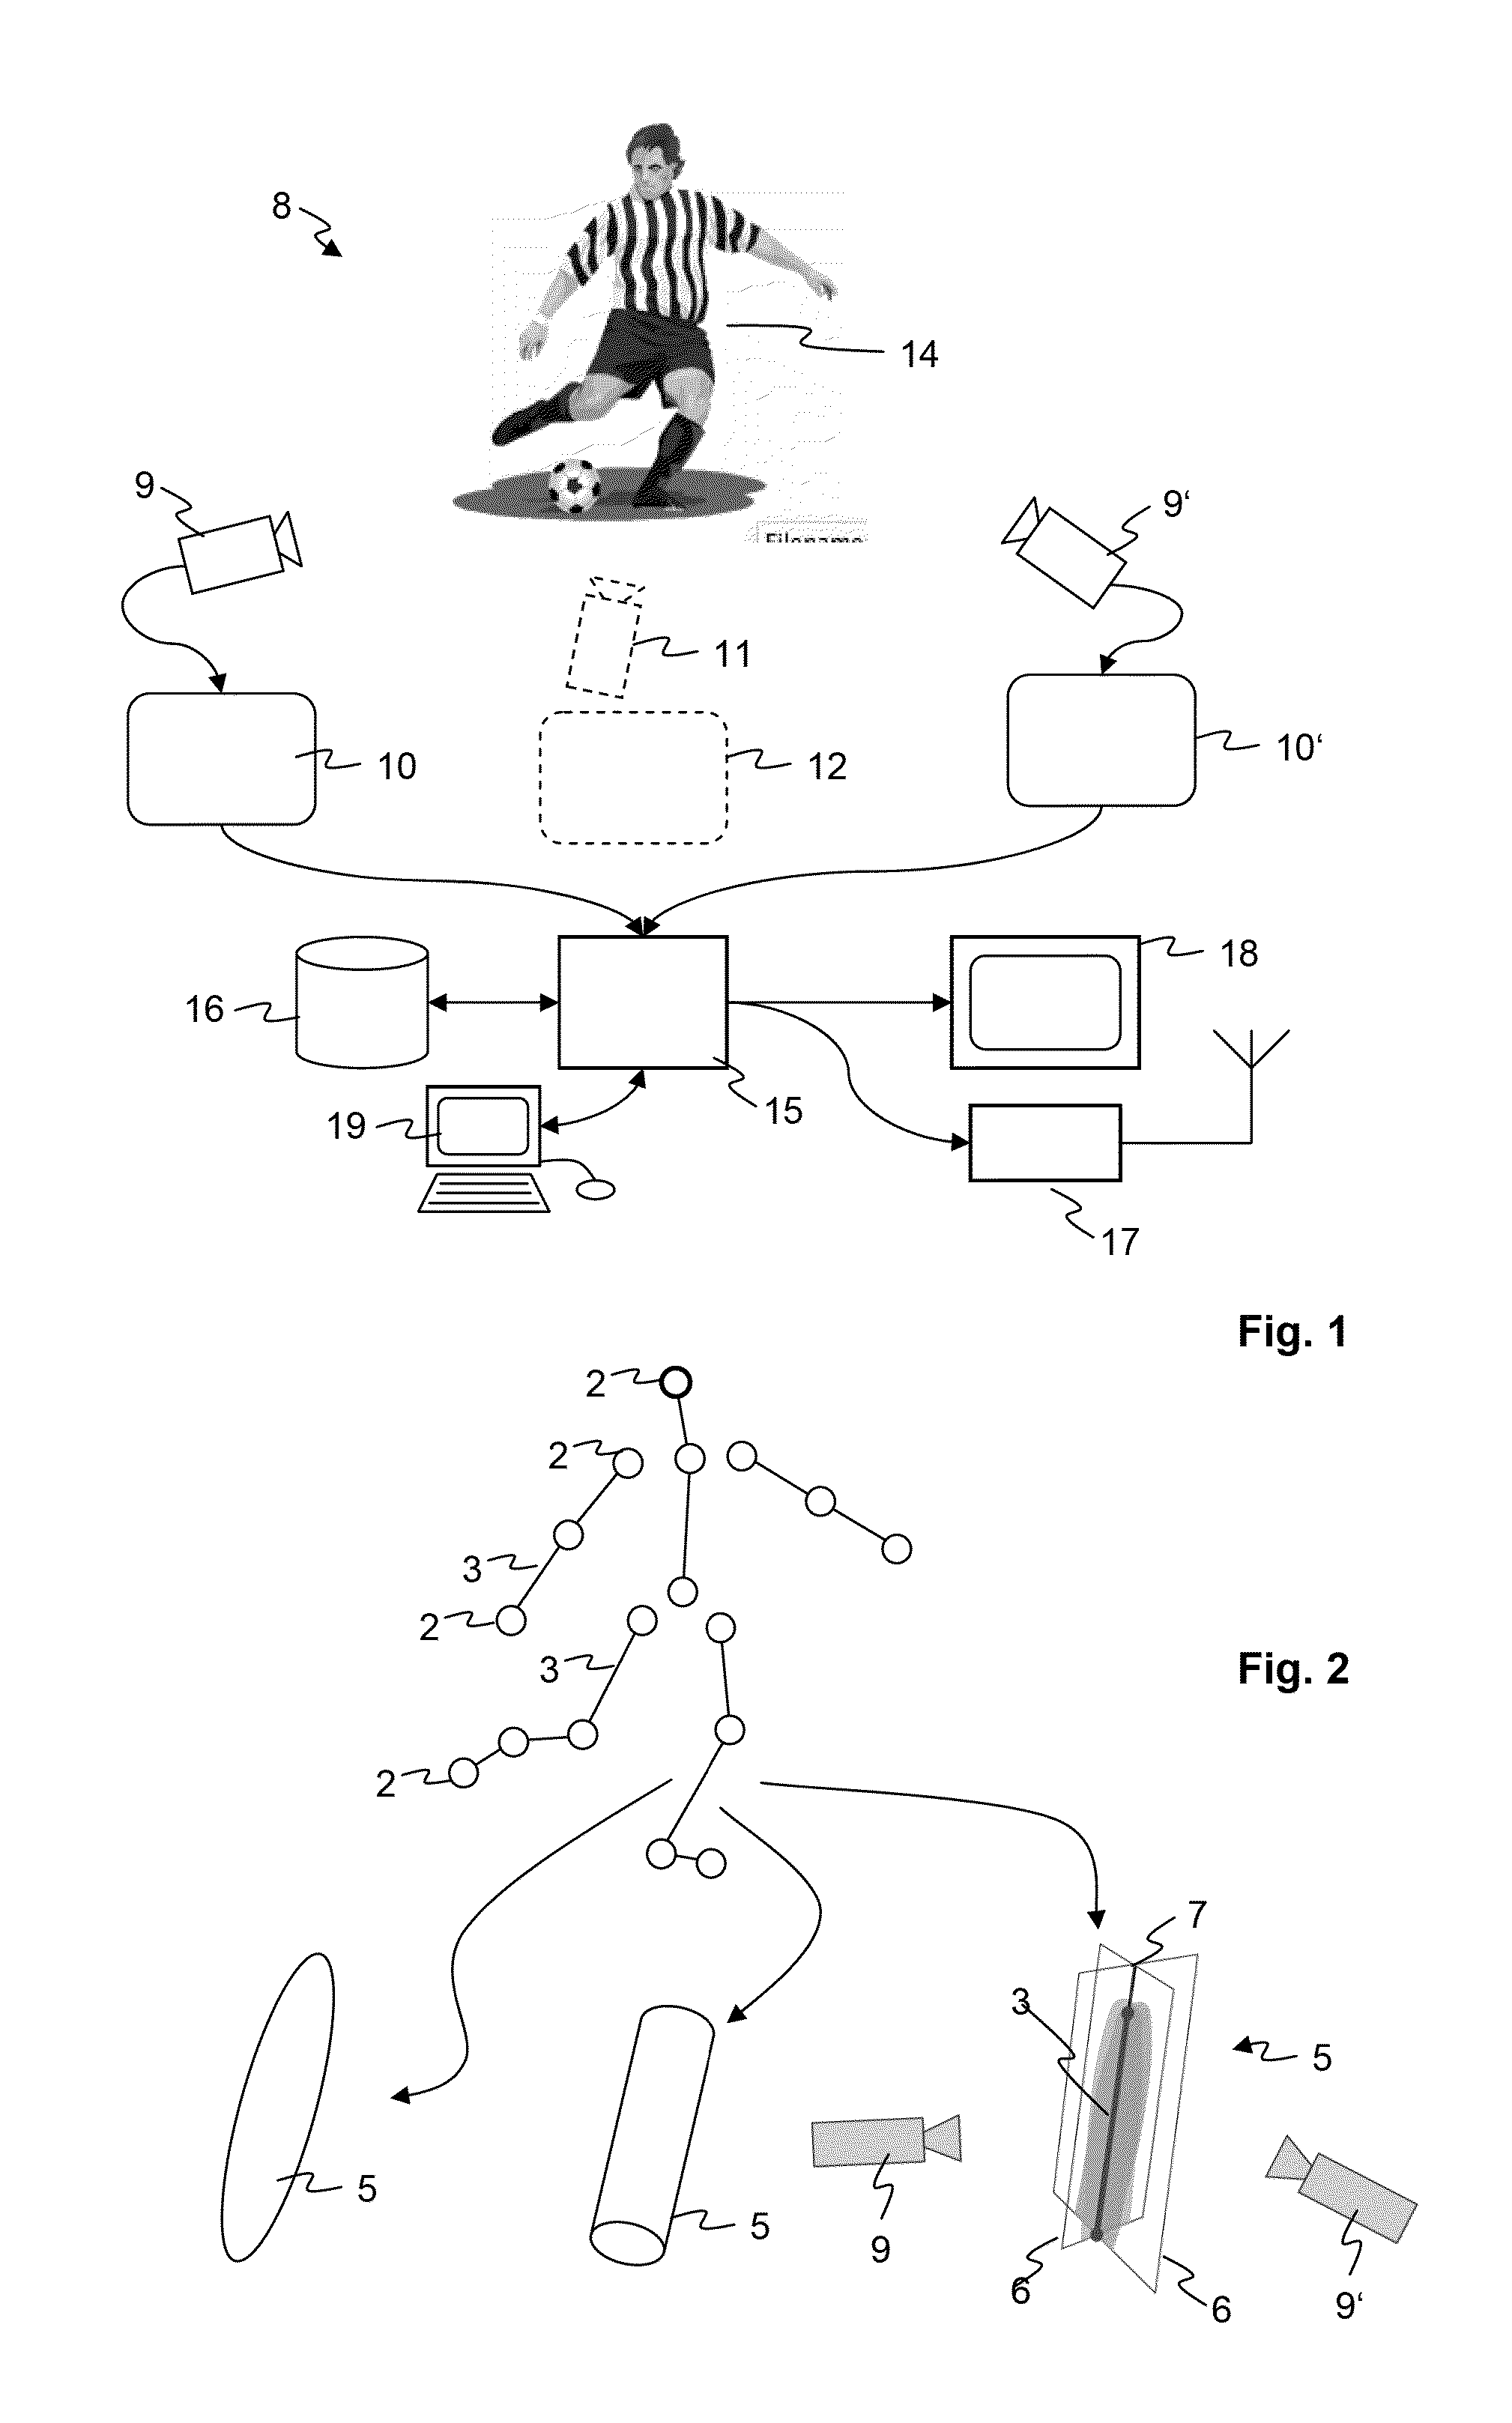 Method for estimating a pose of an articulated object model